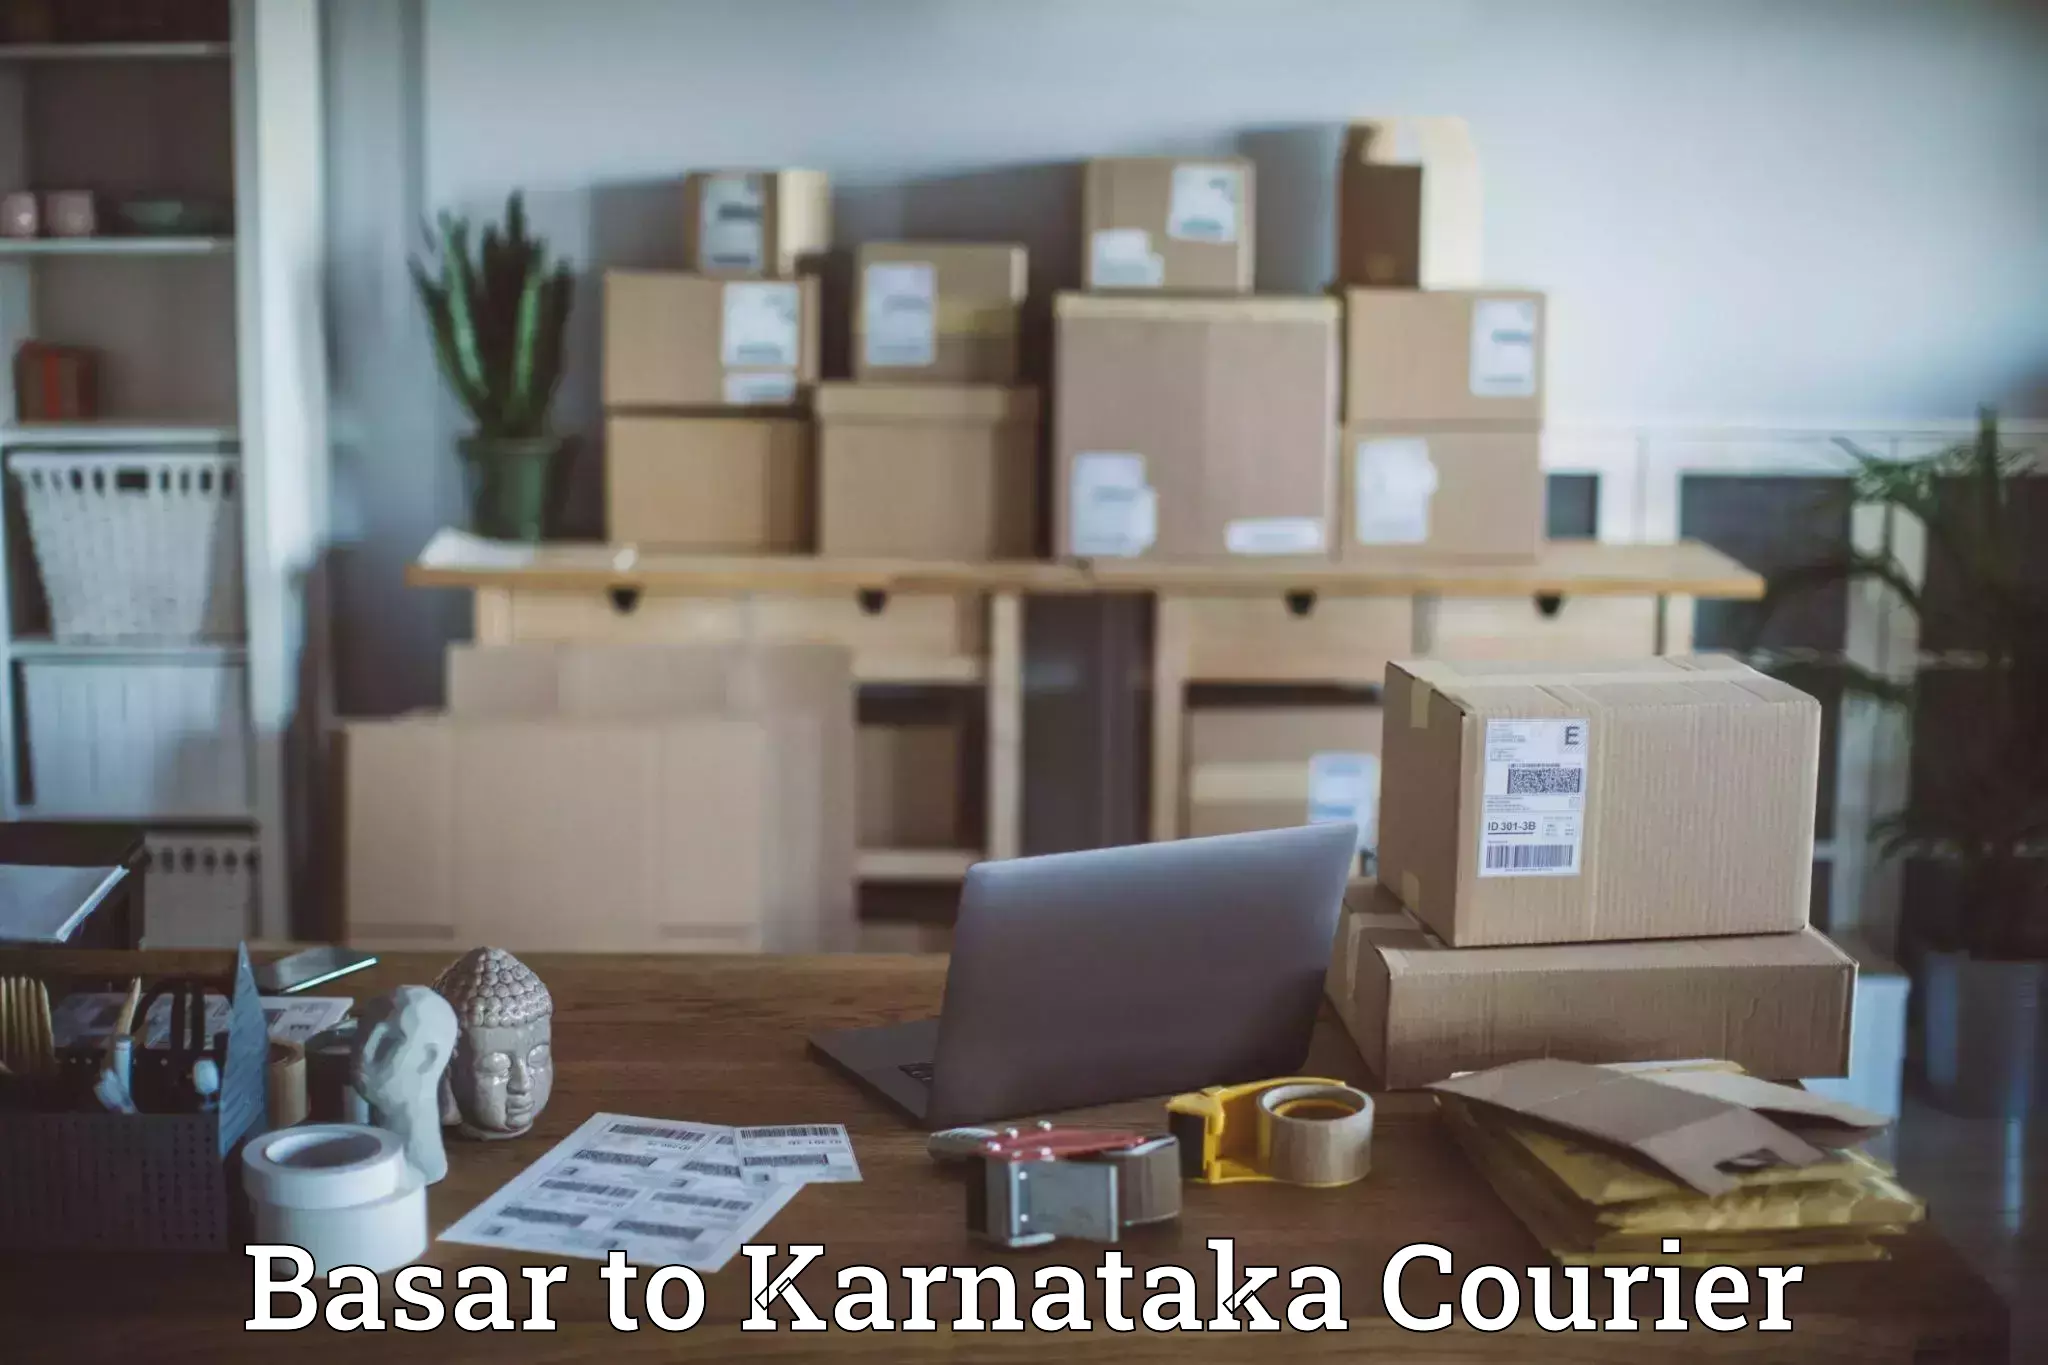 Package delivery network Basar to Karnataka